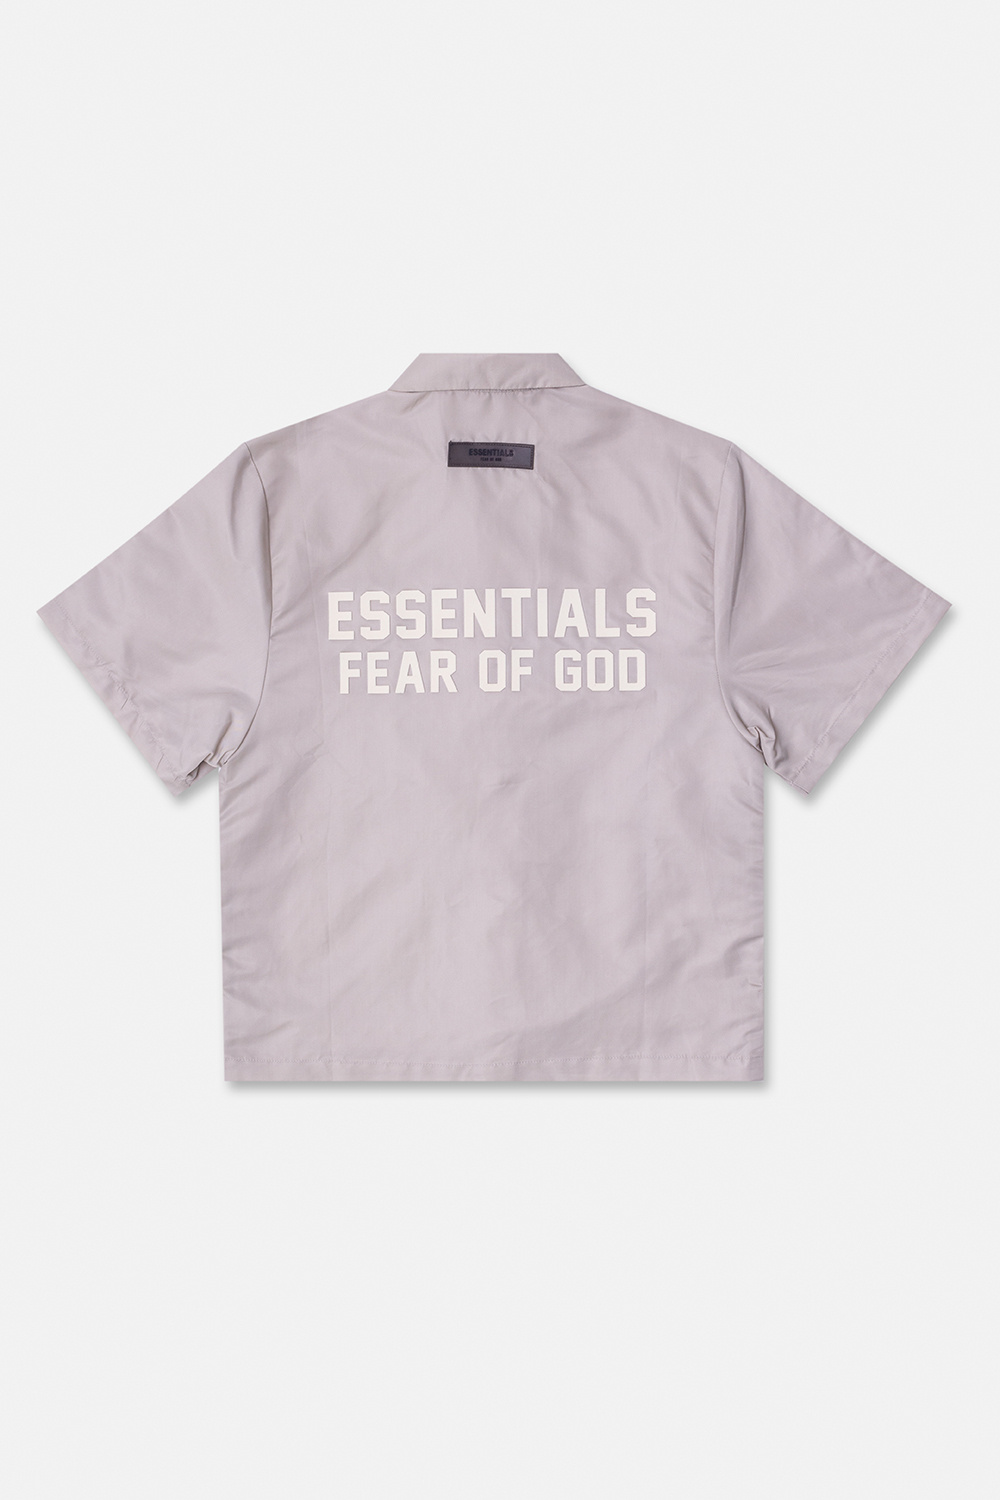 Fear Of God Essentials Kids HOODED shirt with logo